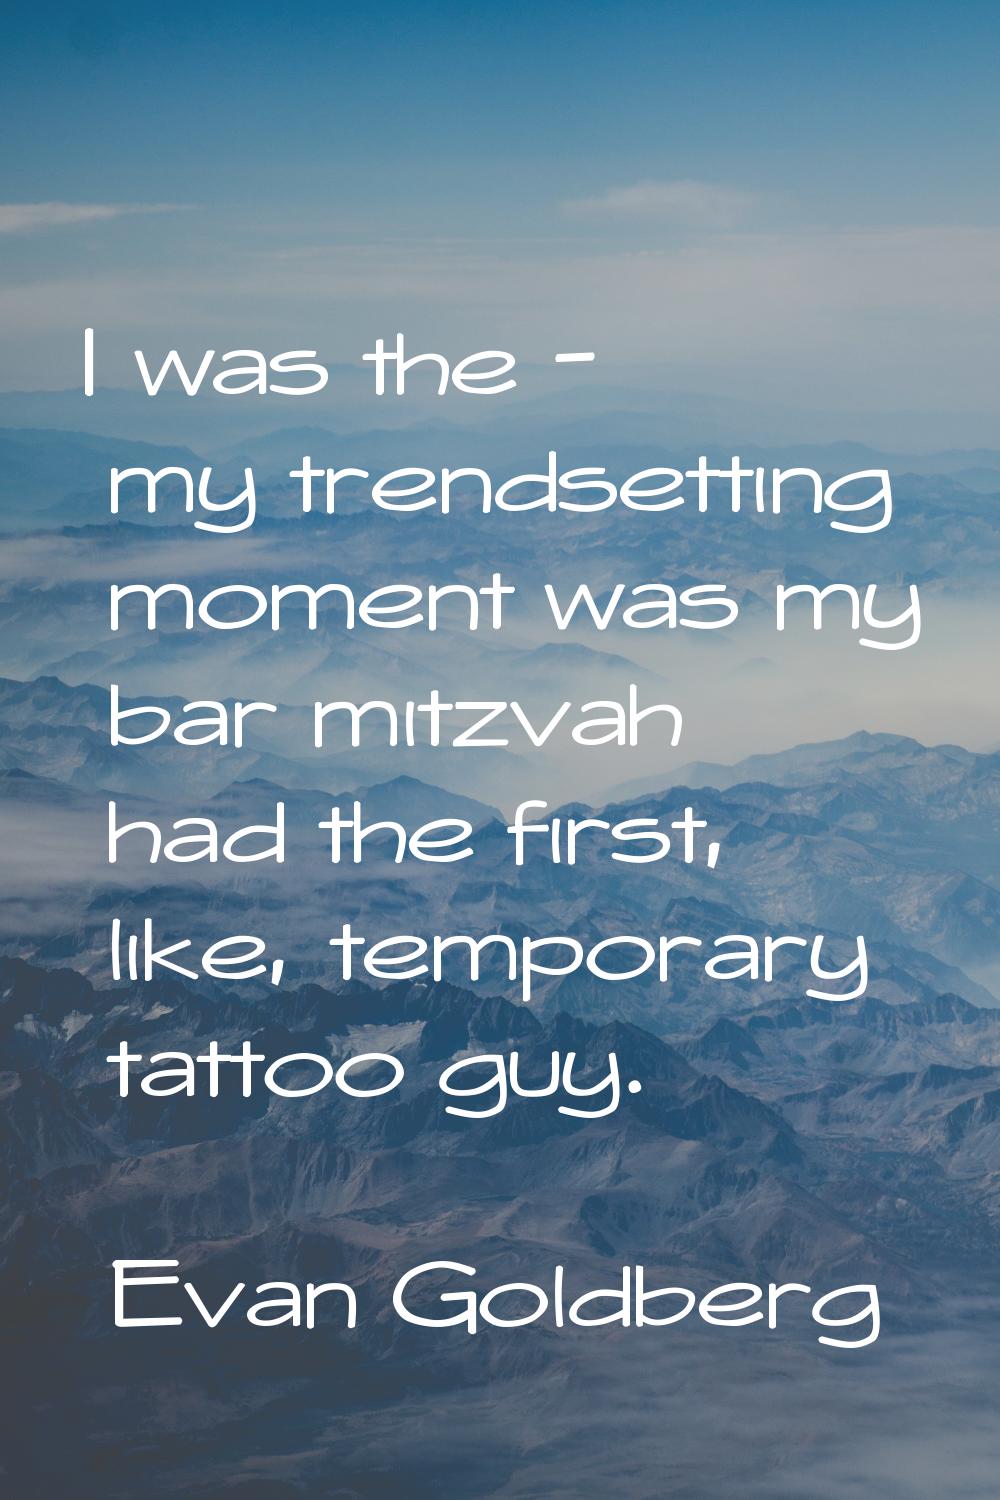 I was the - my trendsetting moment was my bar mitzvah had the first, like, temporary tattoo guy.